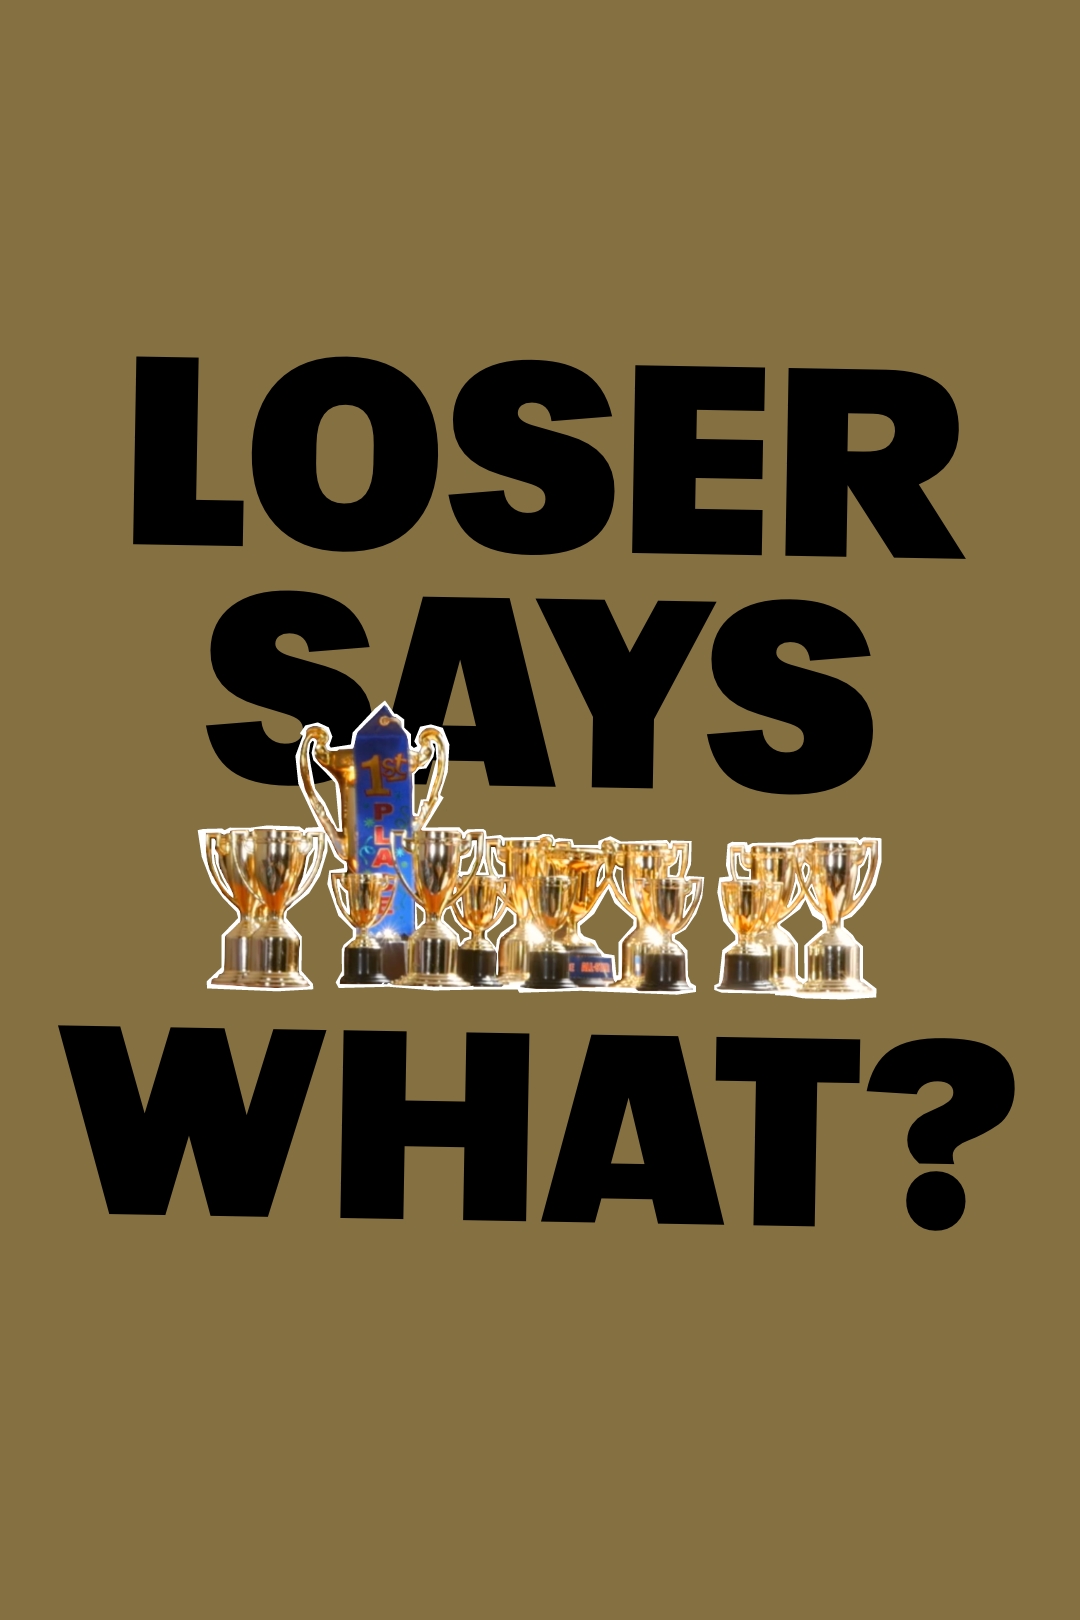 Poster for the film "Loser Says What?"